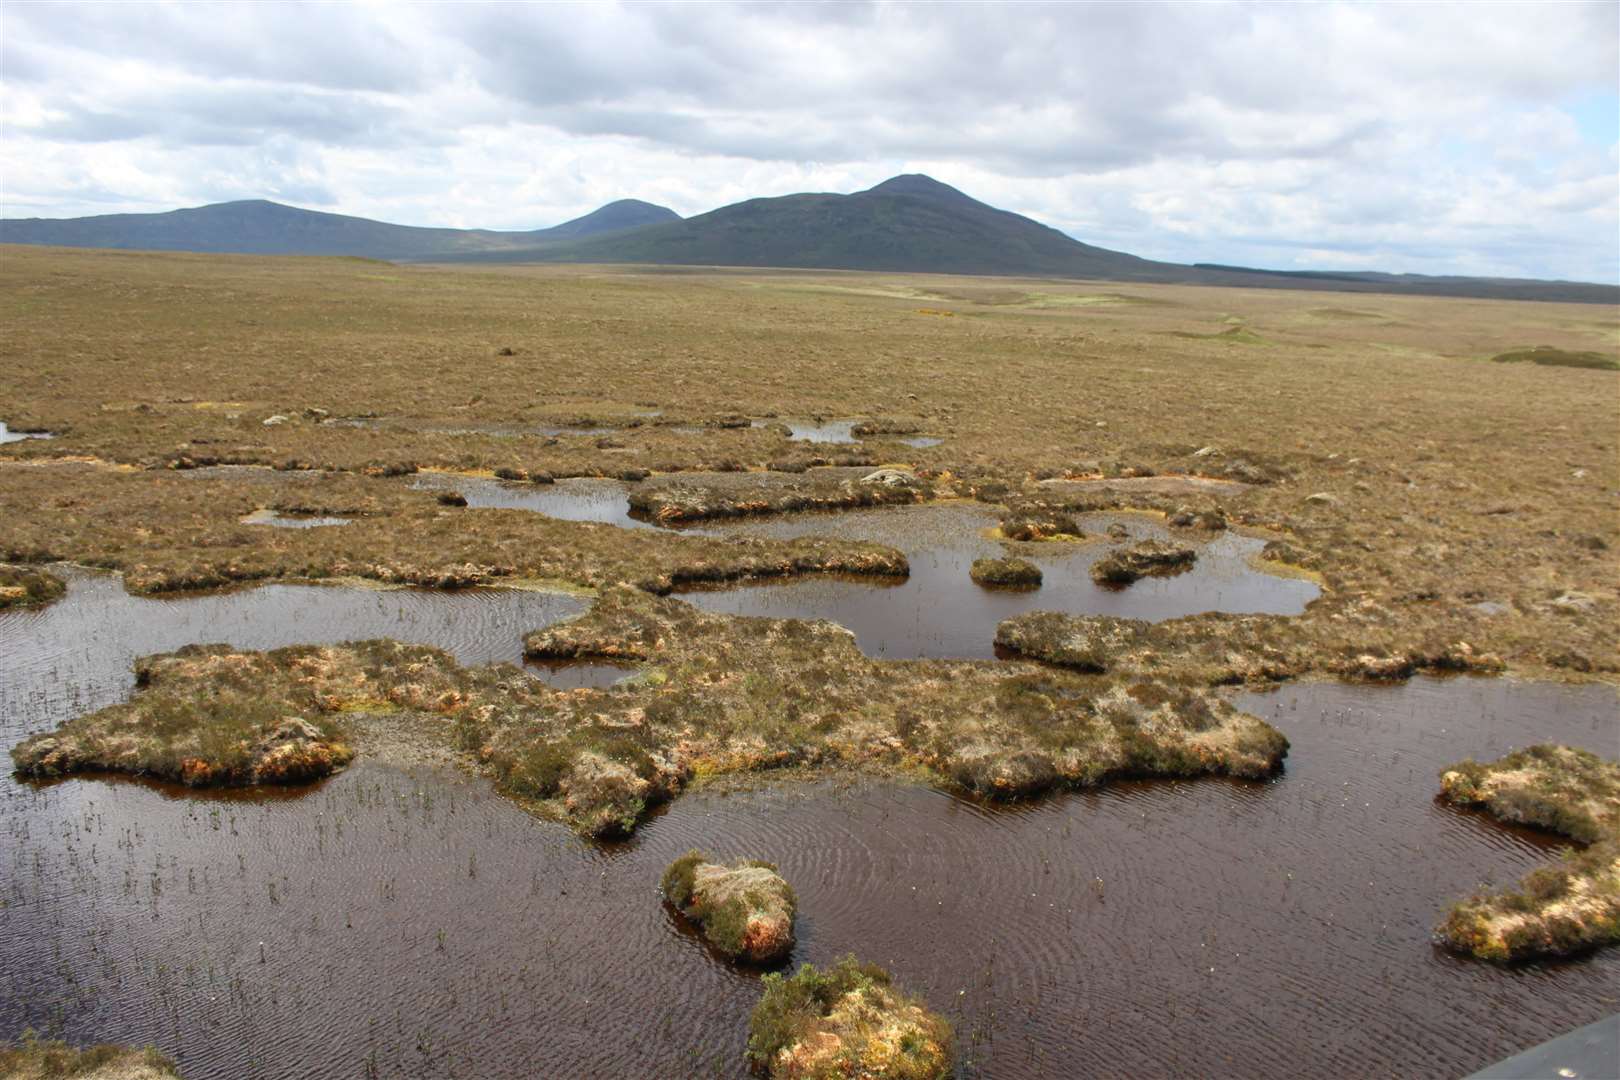 The most intact and extensive blanket bog system in the world, The Flow Country is the UK’s greatest resource against global climate change and consists of over 400,000 hectares of peatland across Caithness and Sutherland.